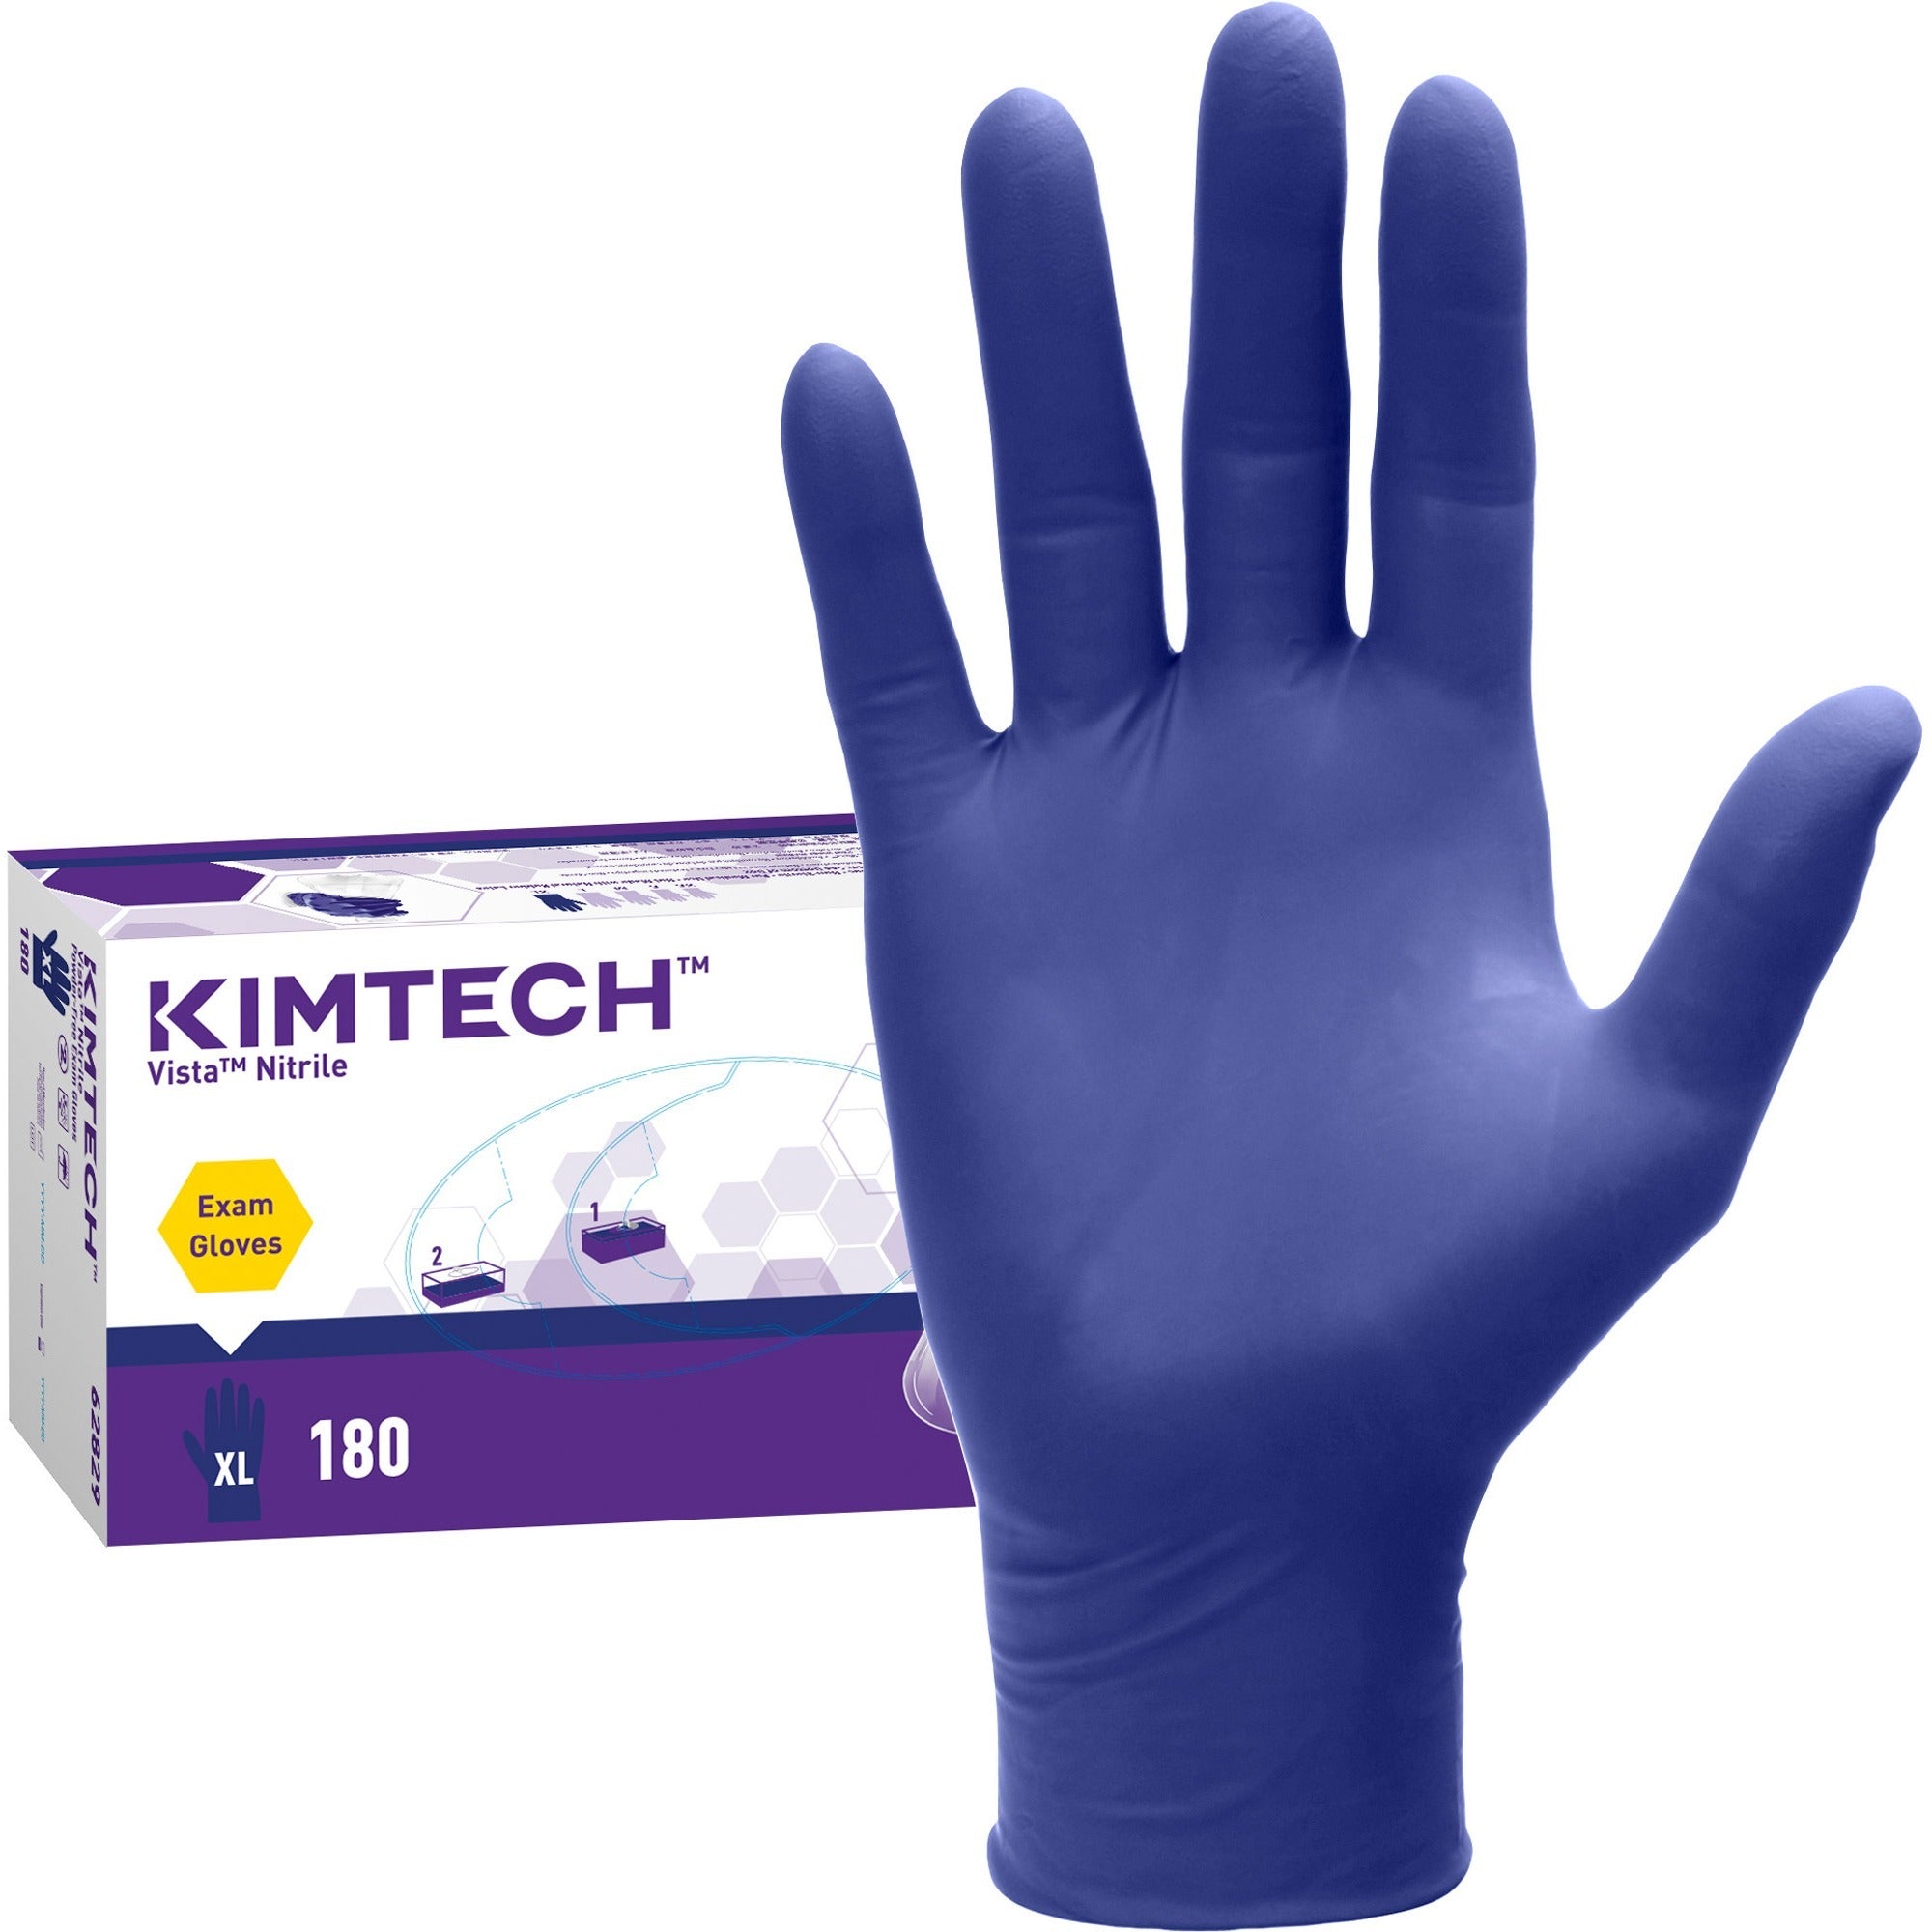 kimtech-vista-nitrile-exam-gloves-x-large-size-nitrile-blue-recyclable-textured-fingertip-powdered-non-sterile-for-laboratory-application-180-box-47-mil-thickness-950-glove-length_kcc62829 - 1